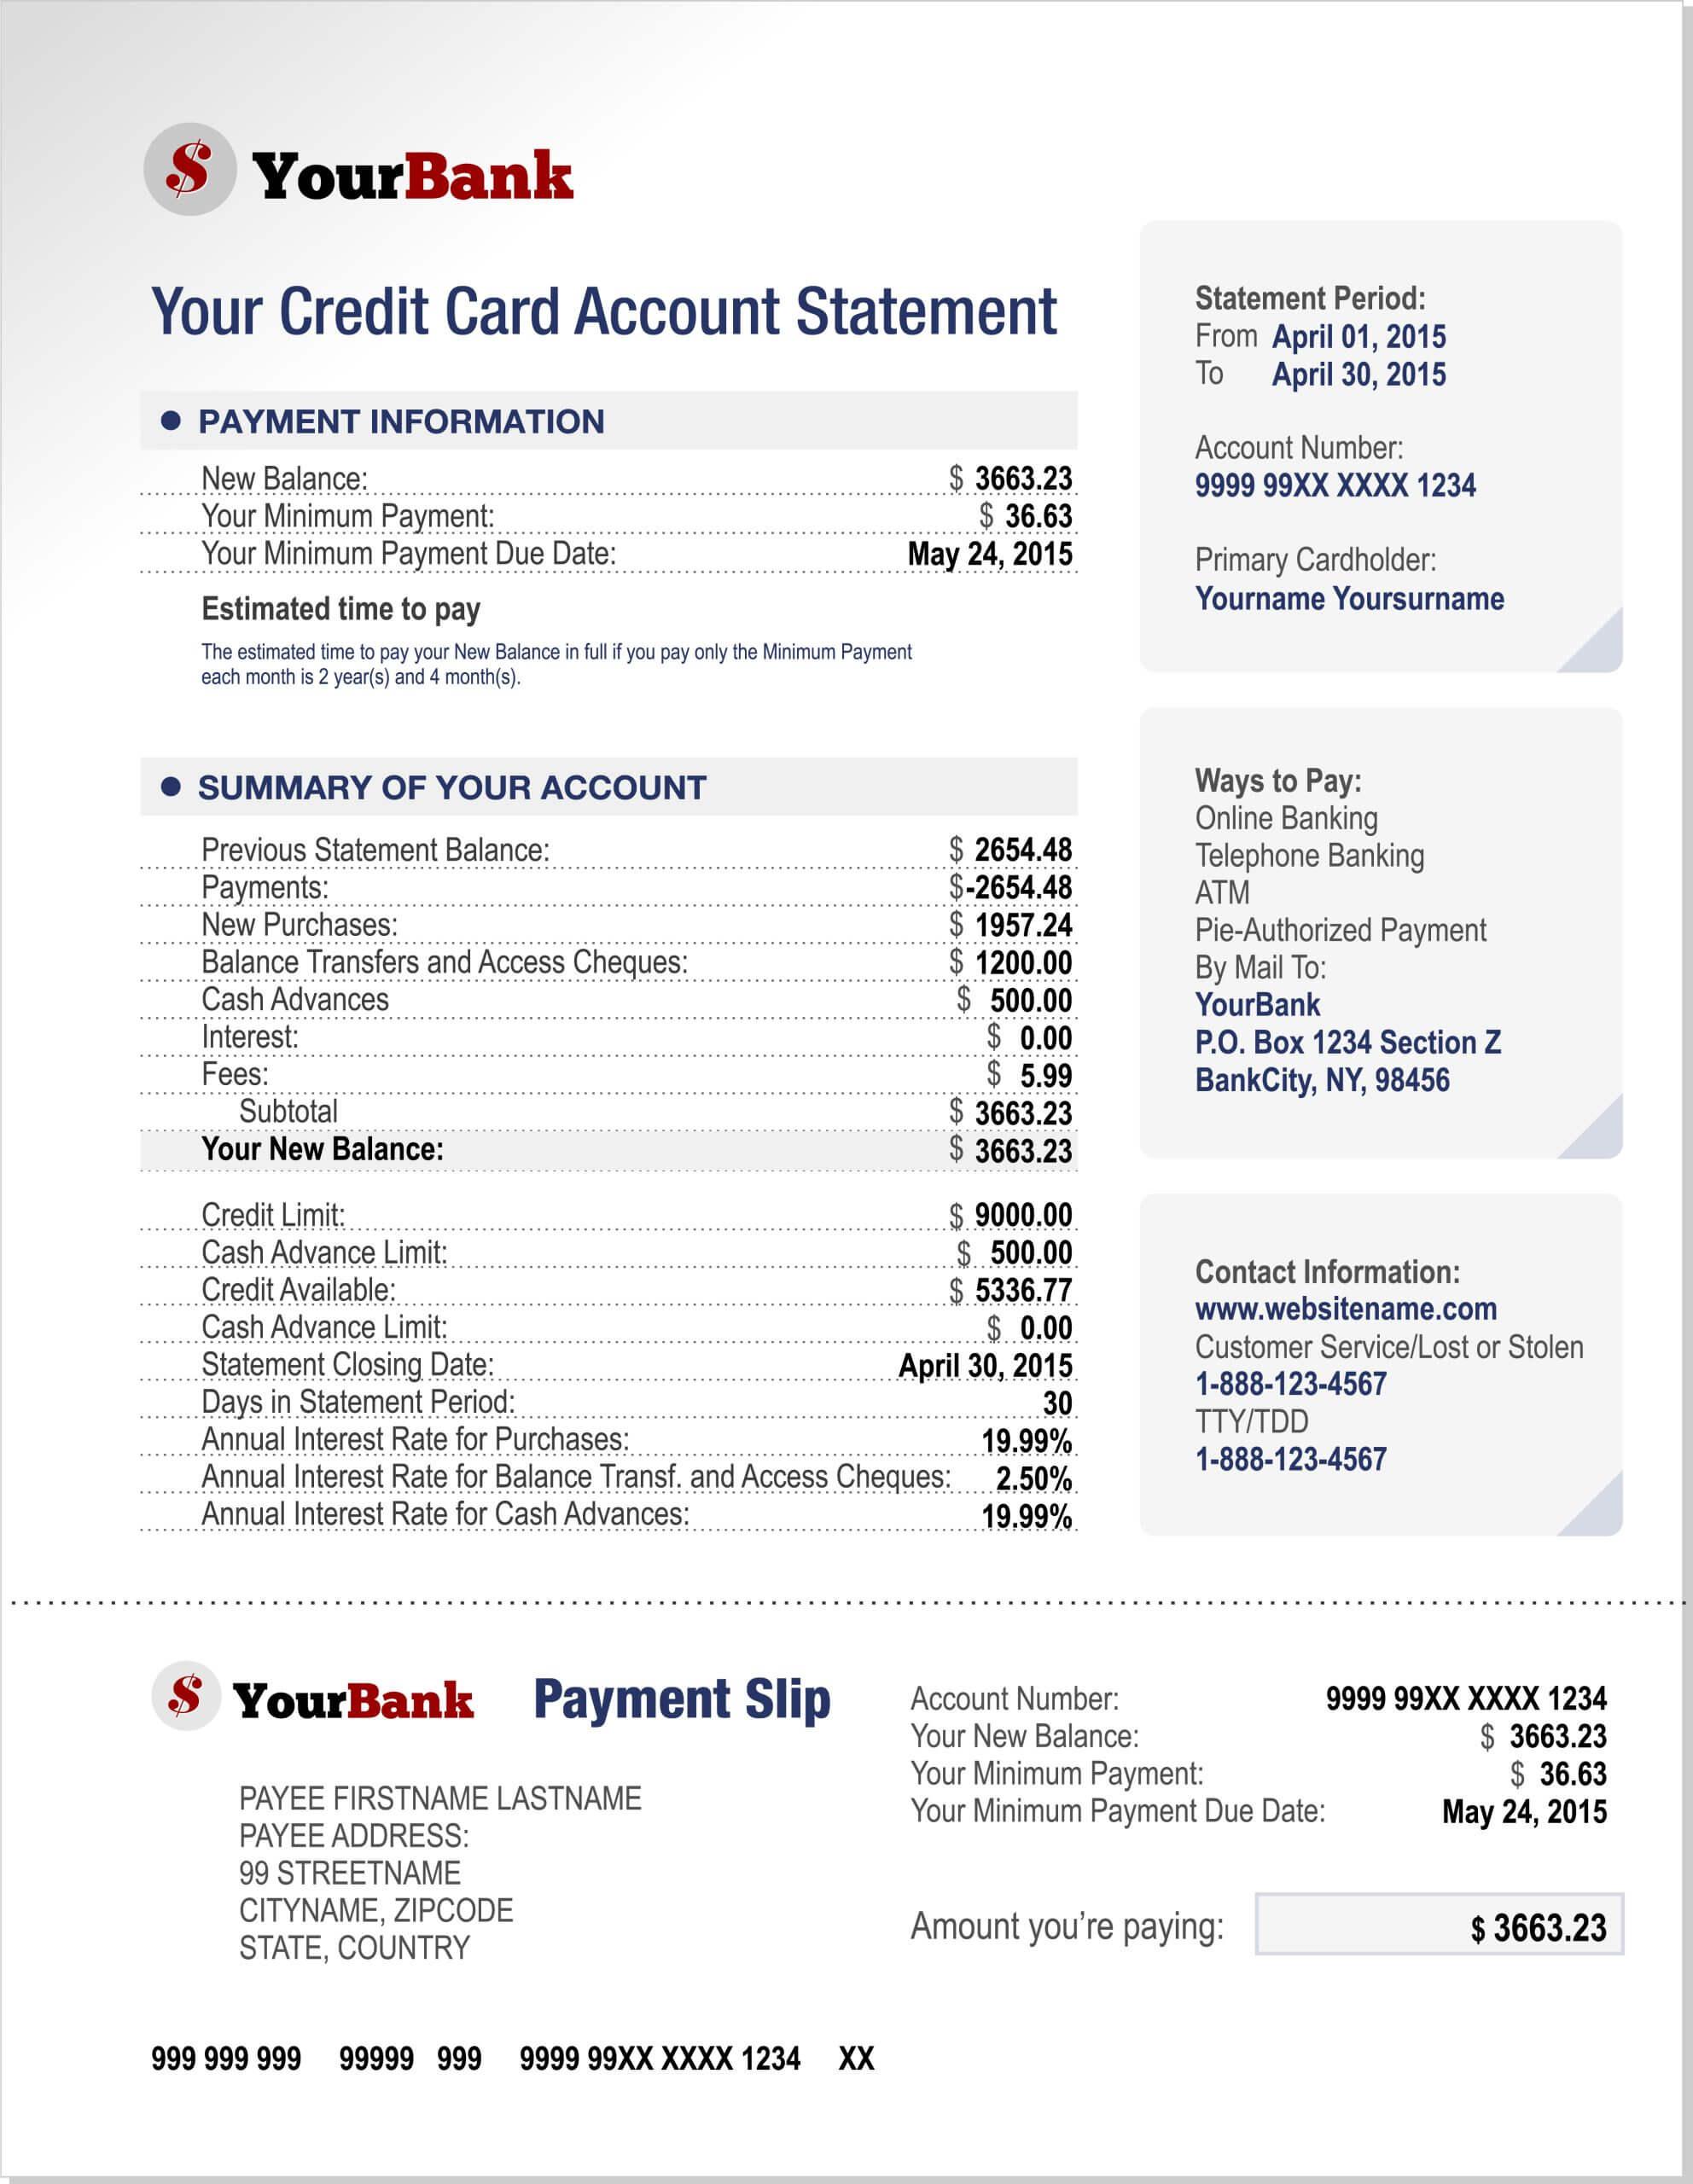 Example credit card account statement